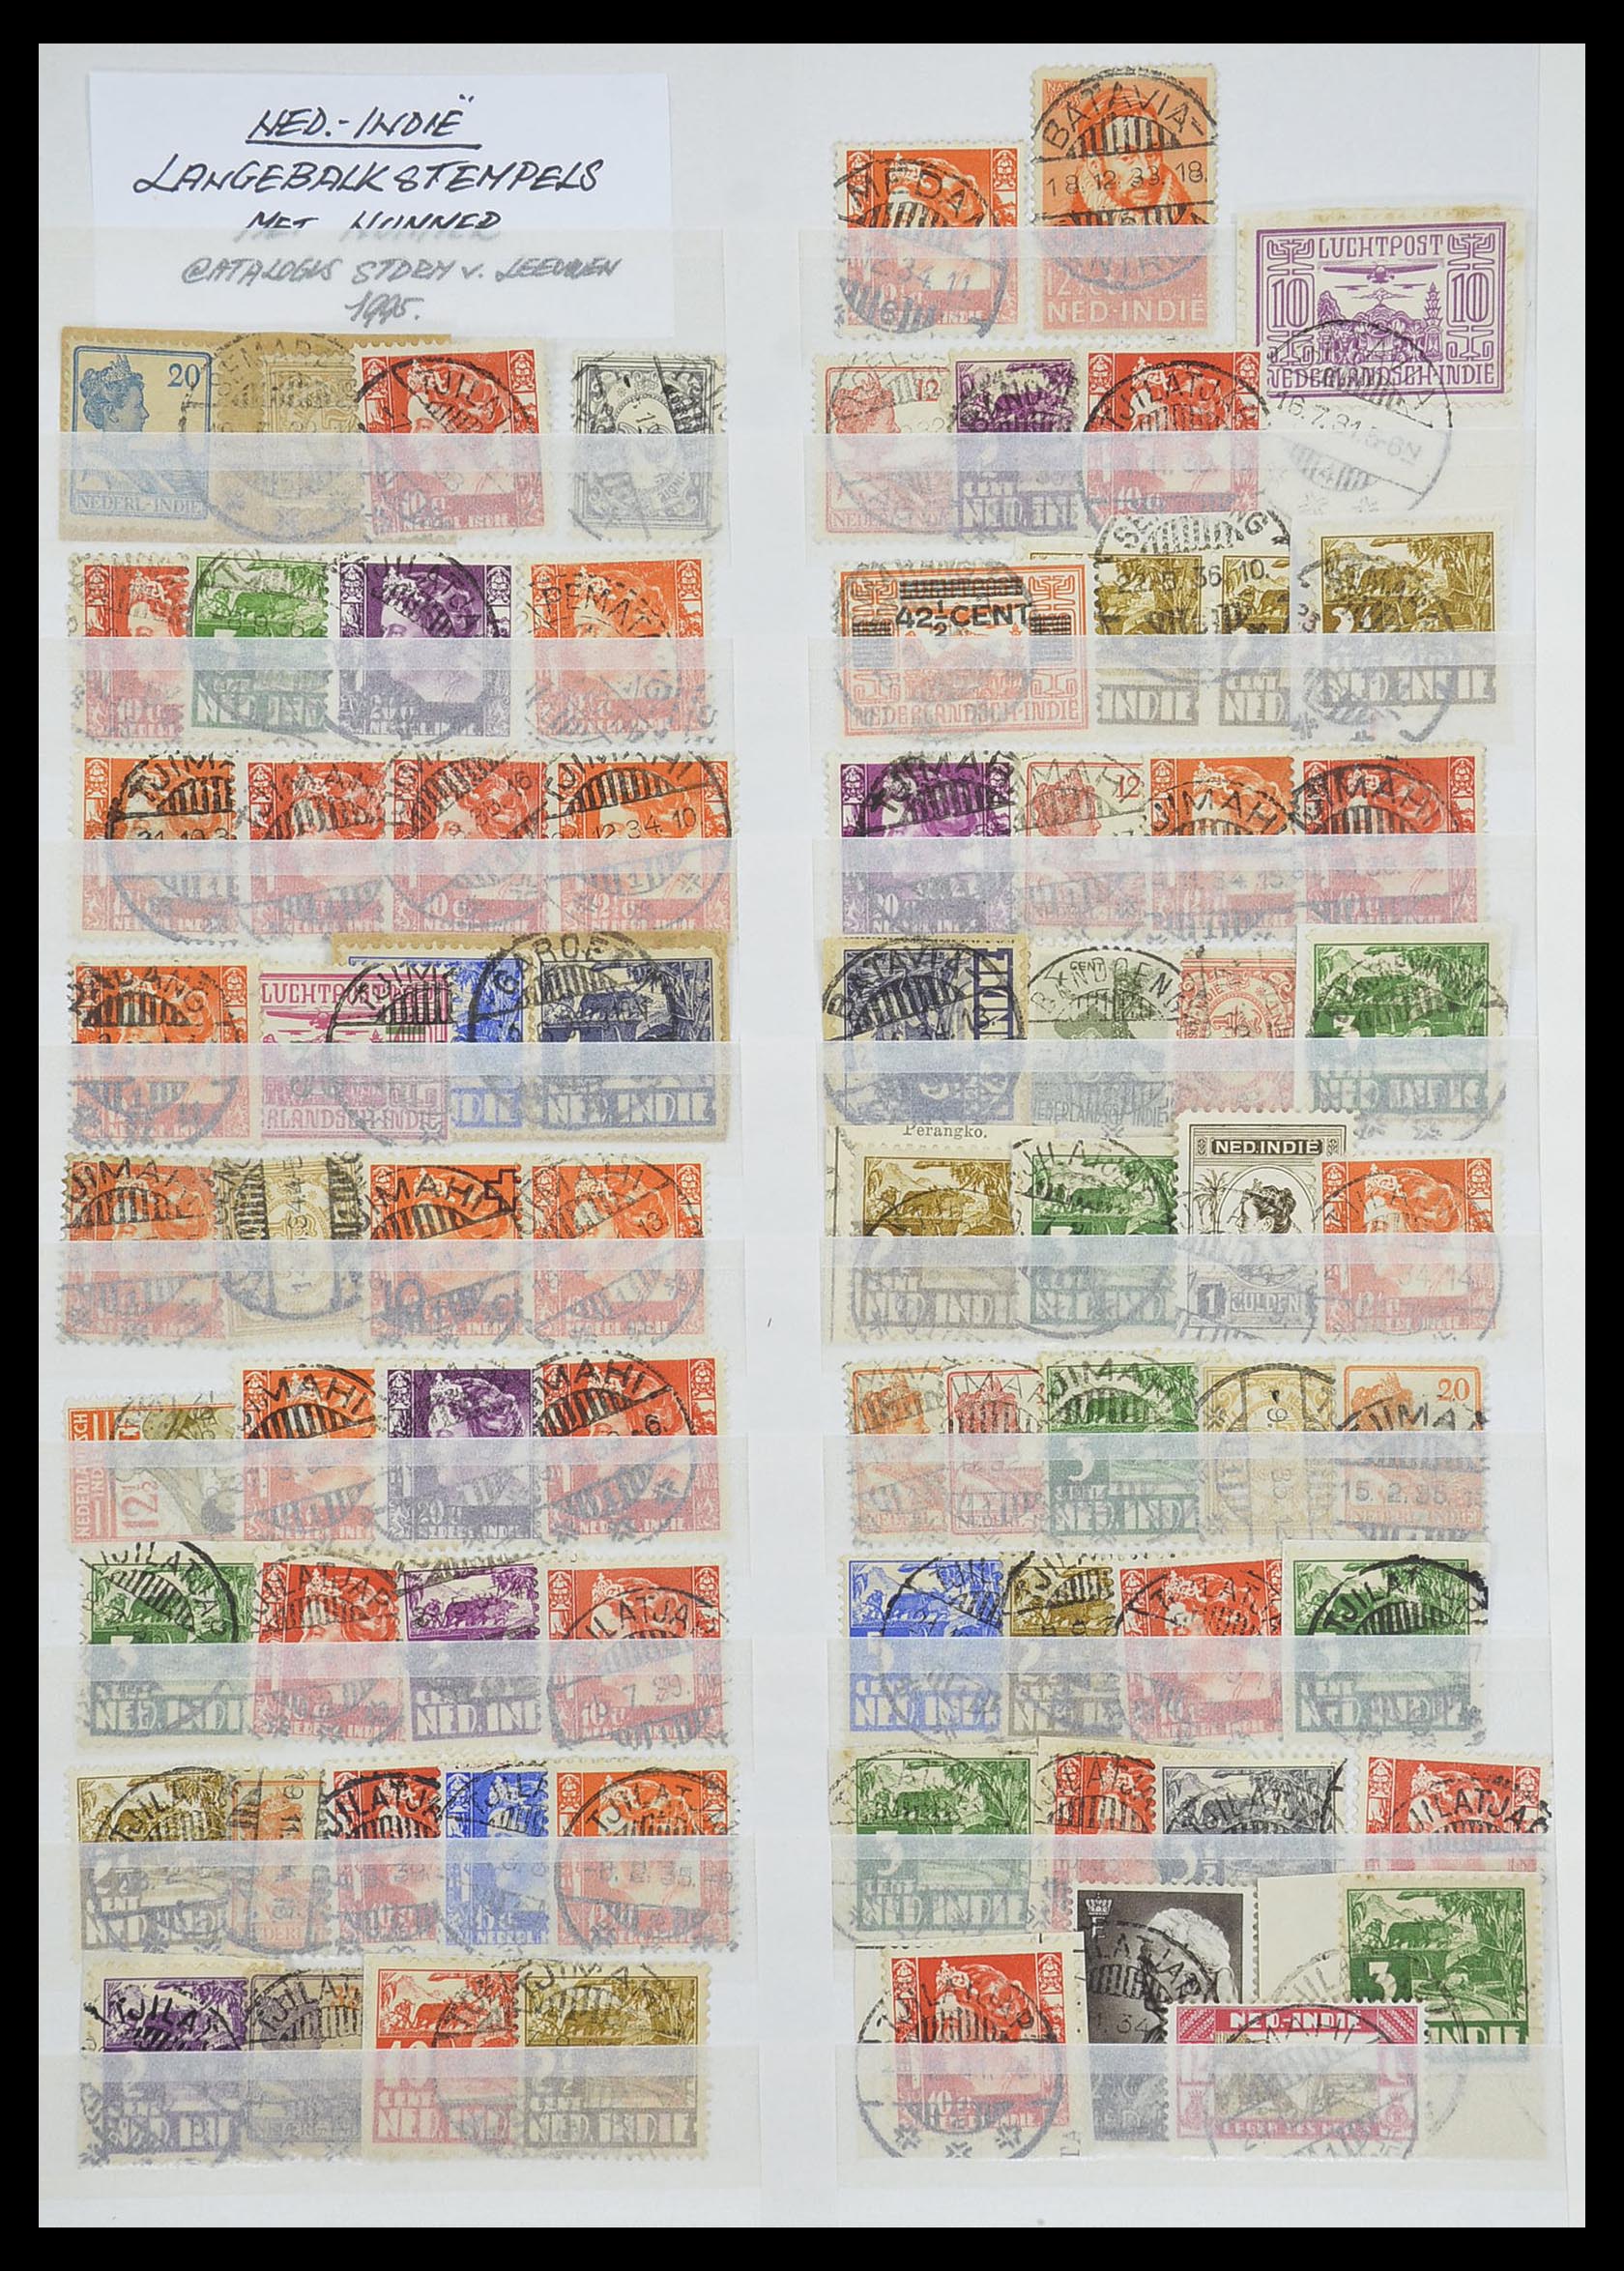 33718 014 - Stamp collection 33718 Dutch east Indies cancels.